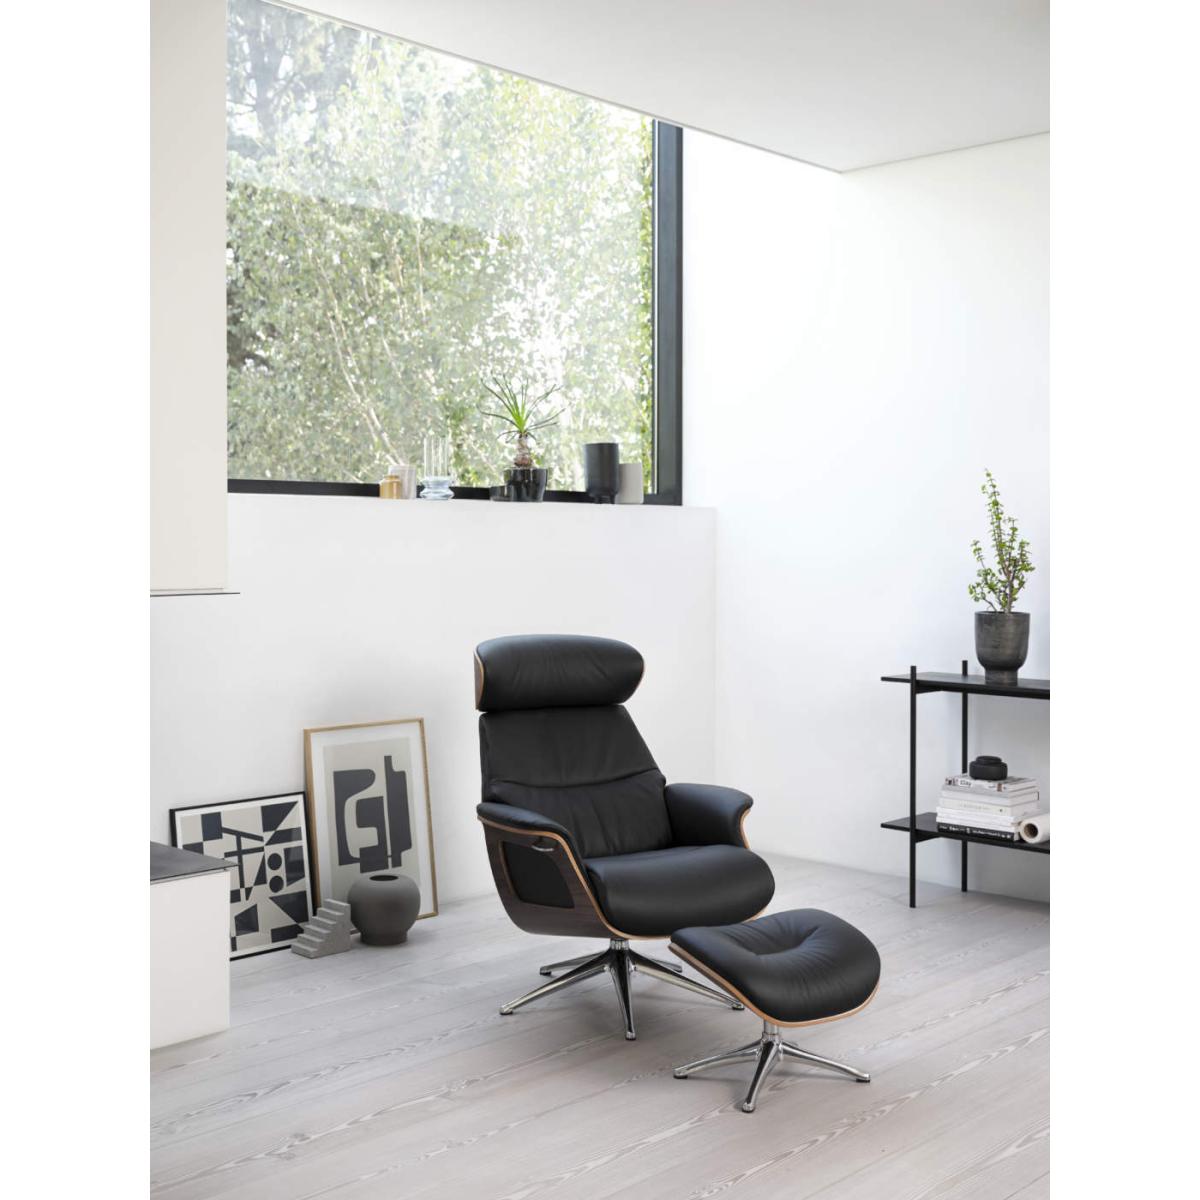 CLEMENT chair | relax leather InnoConcept